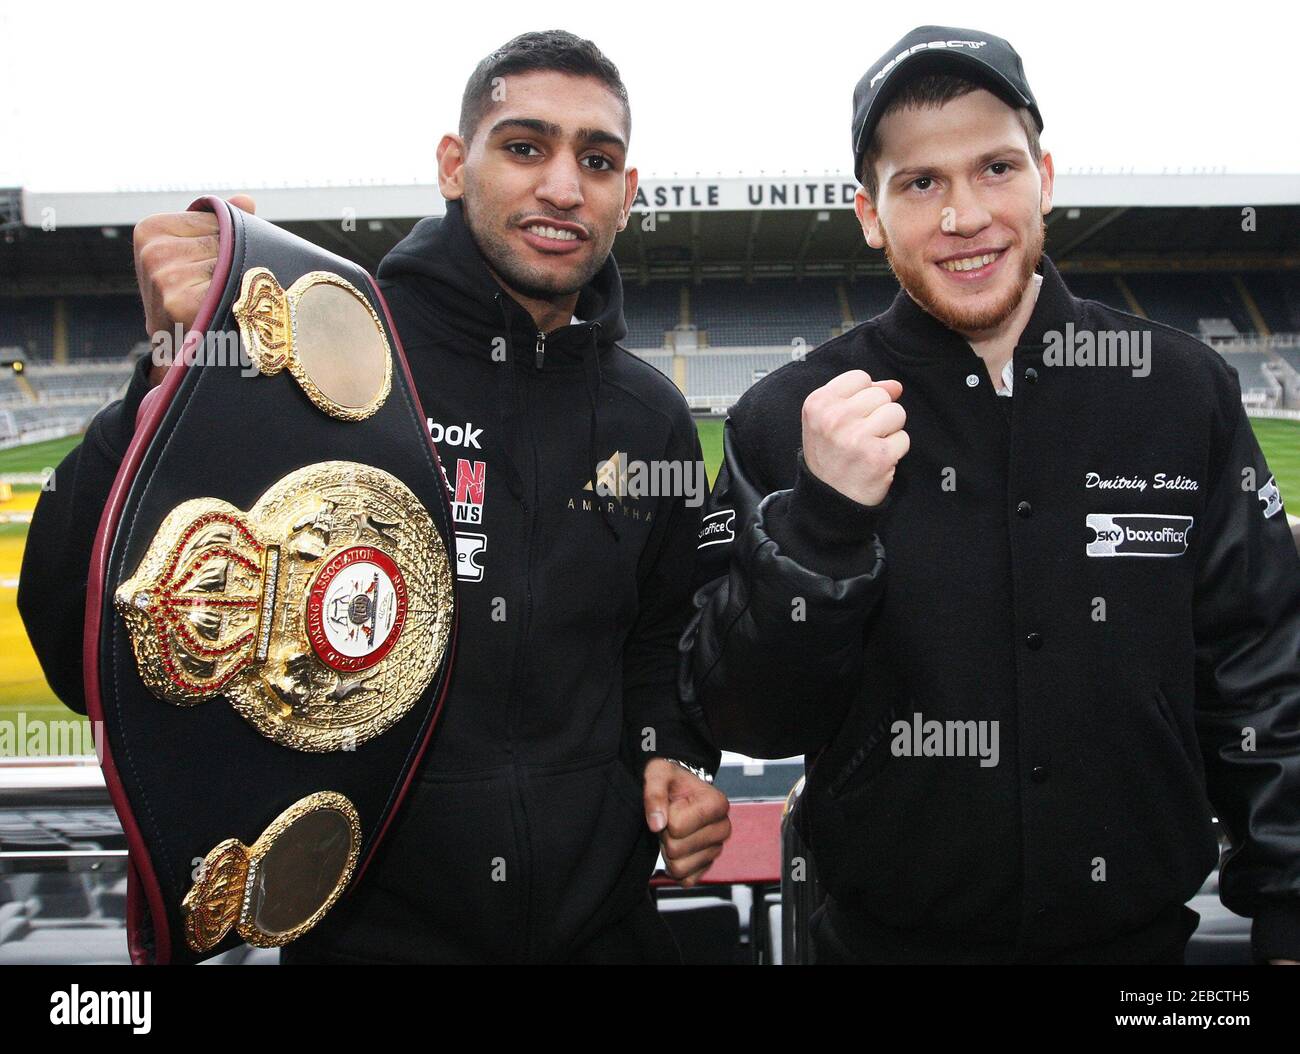 Boxing - Amir Khan & Dmitriy Salita Head-to-Head Press Conference - Newcastle United FC, St James' Park, Newcastle upon Tyne NE1 4ST - 3/12/09  Amir Khan (L) and Dmitriy Salita  Mandatory Credit: Action Images / Lee Smith  Livepic Stock Photo